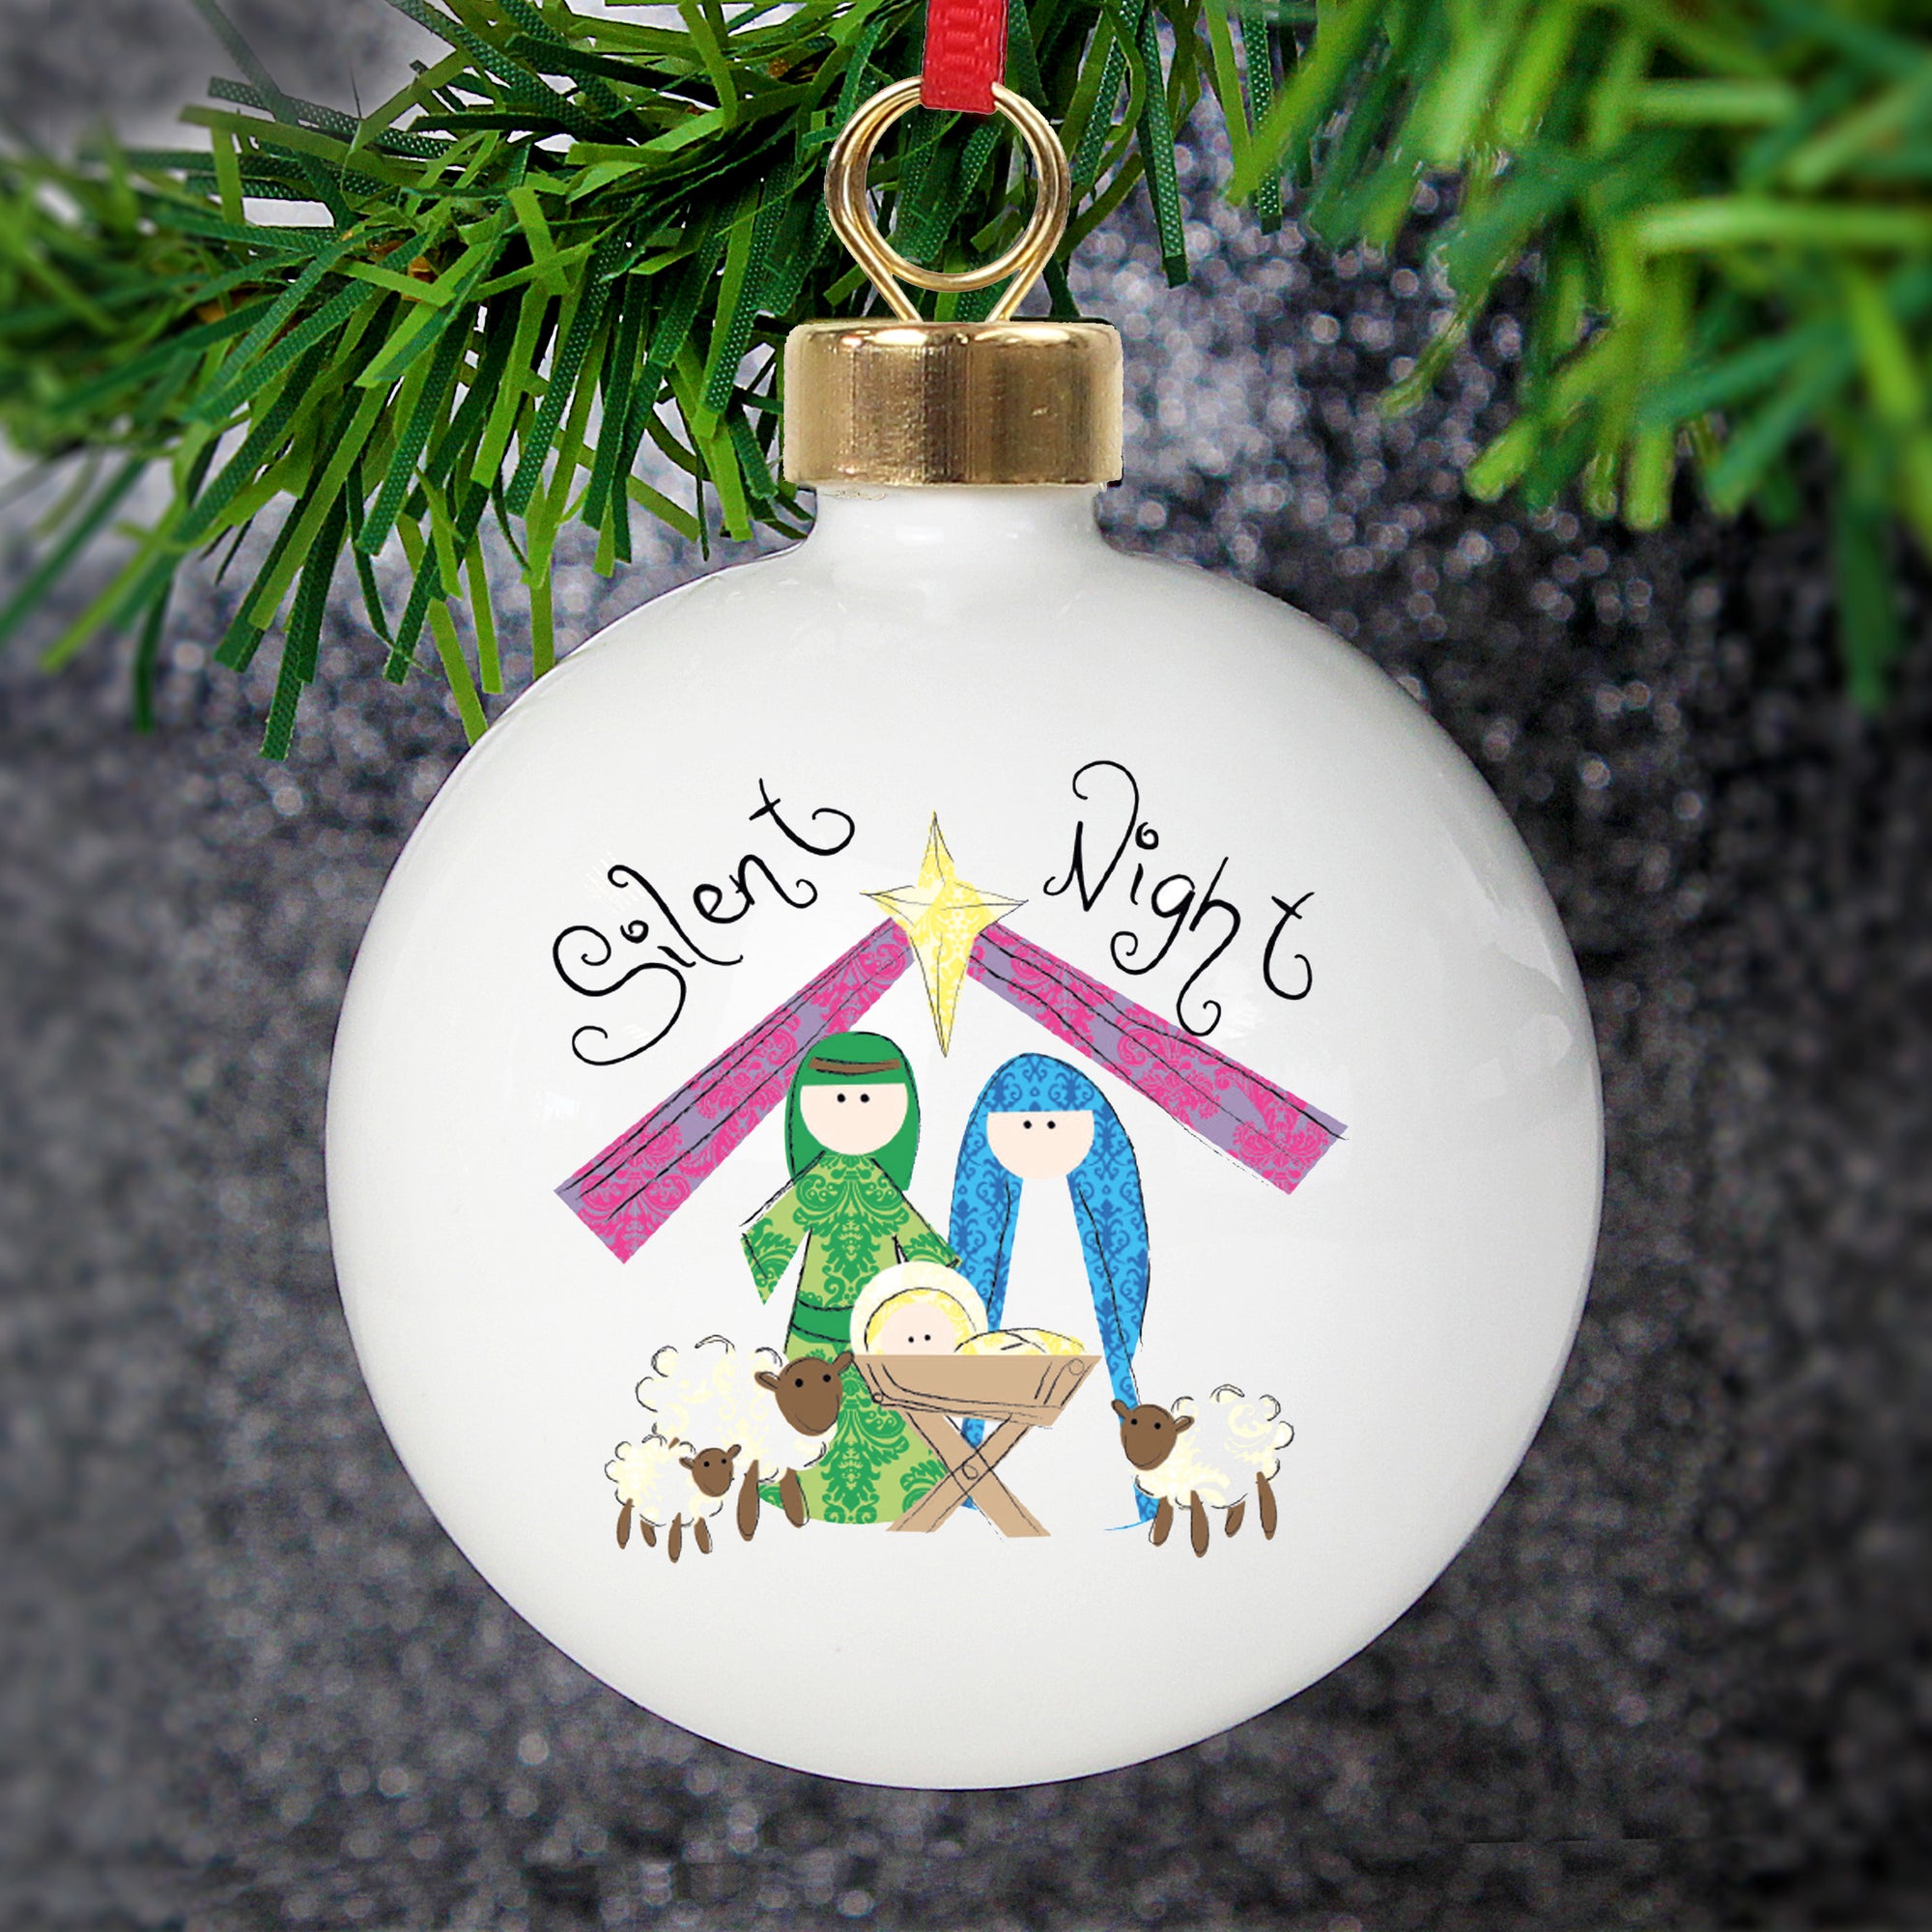 Personalised White Ceramic China Christmas Bauble featuring the text 'Silent Night' and a hand drawn nativity scene.  The rear of the bauble can be personalised with your own message over 4 lines.